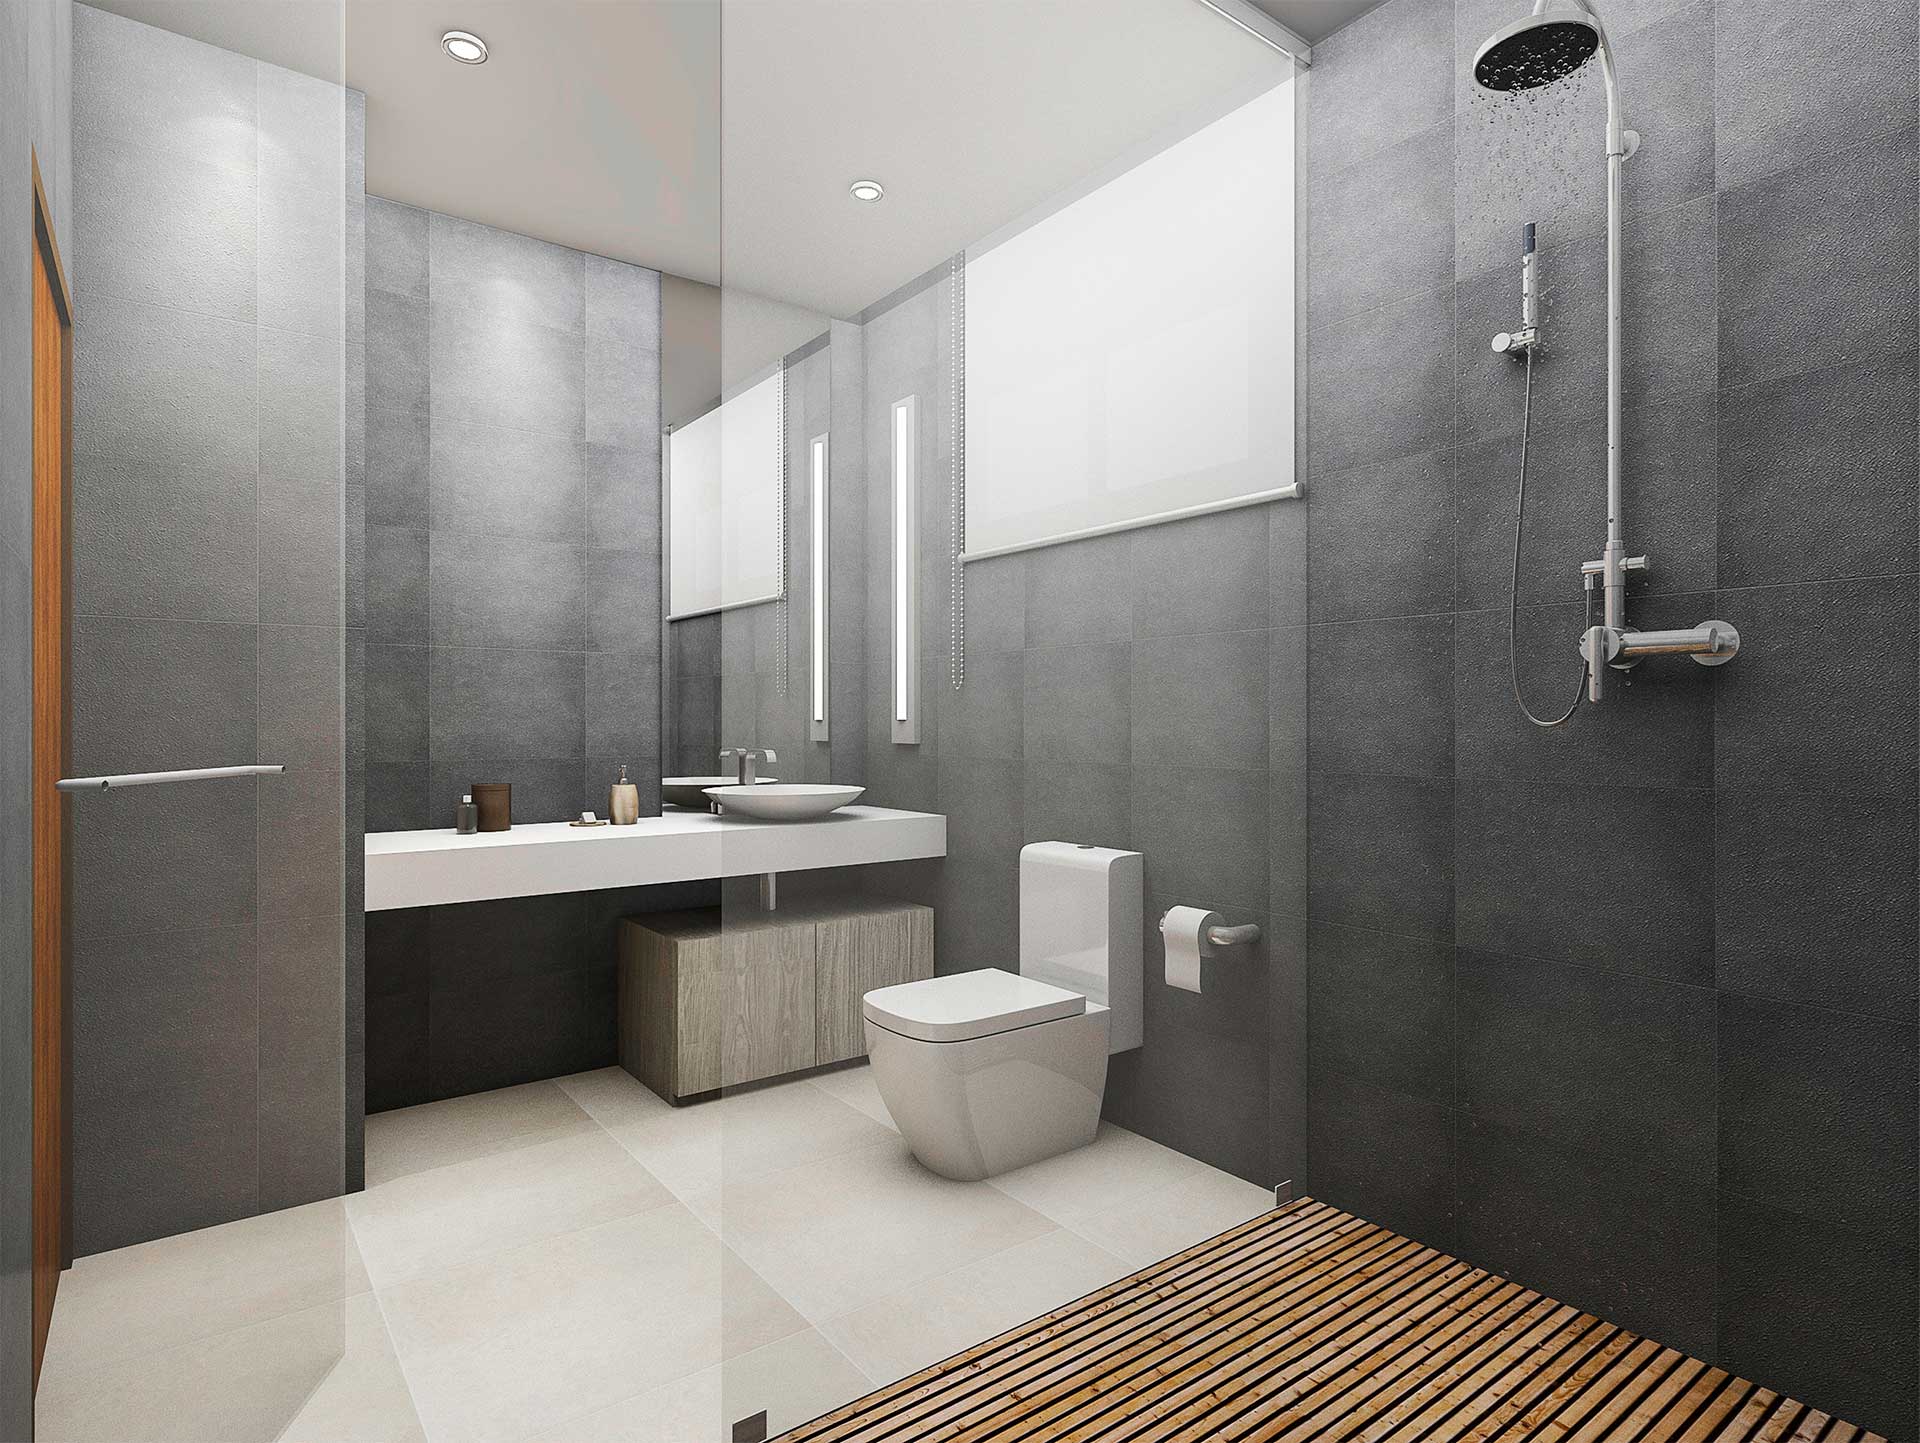 Bathroom with a normal size shower, a white square toilet and a sink with a white counter, floors are white and the faience is dark grey